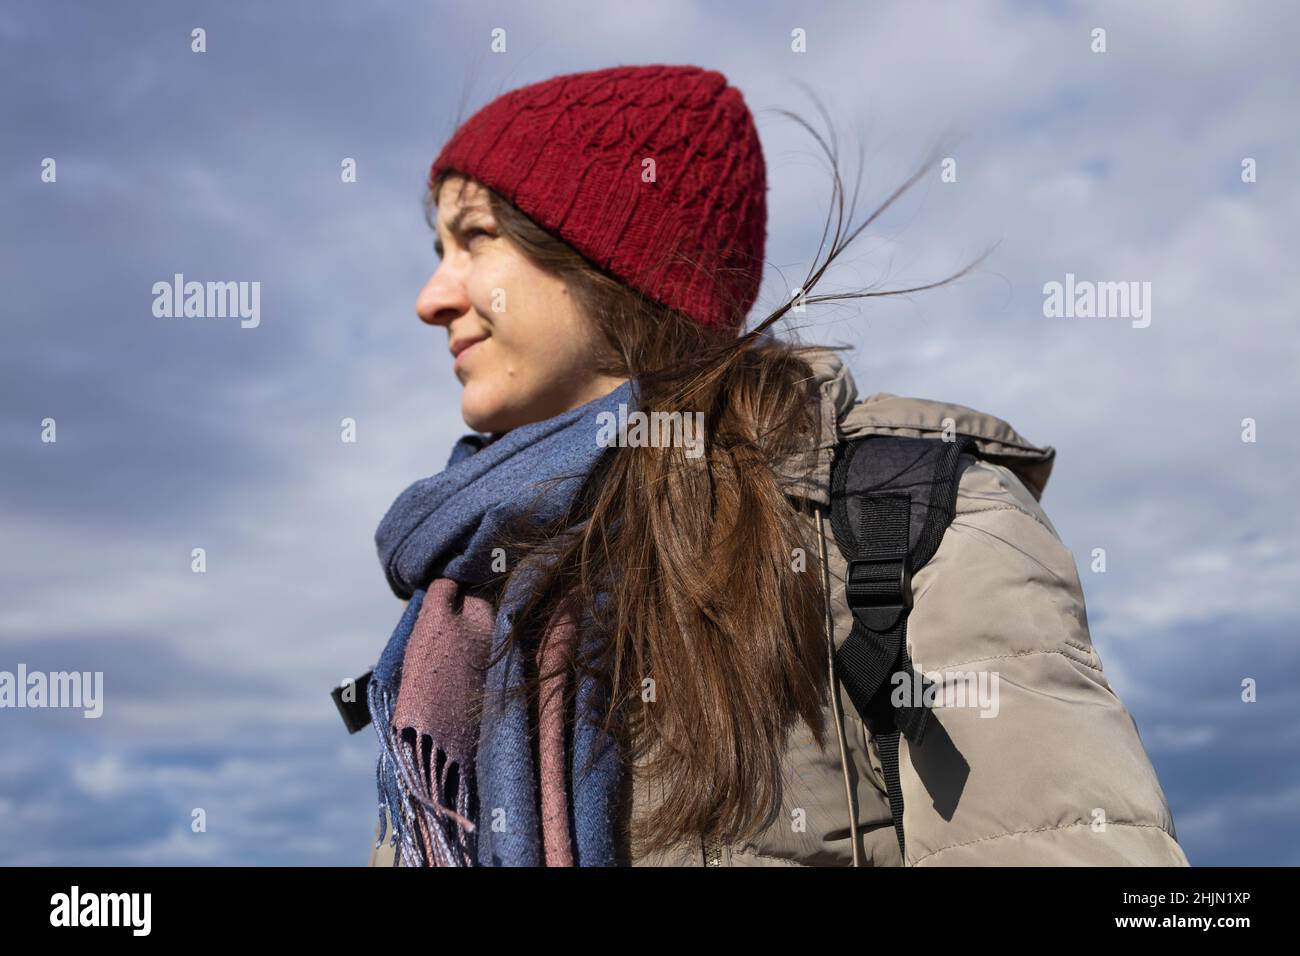 A woman with beautiful natural hair standing in the wind Stock Photo